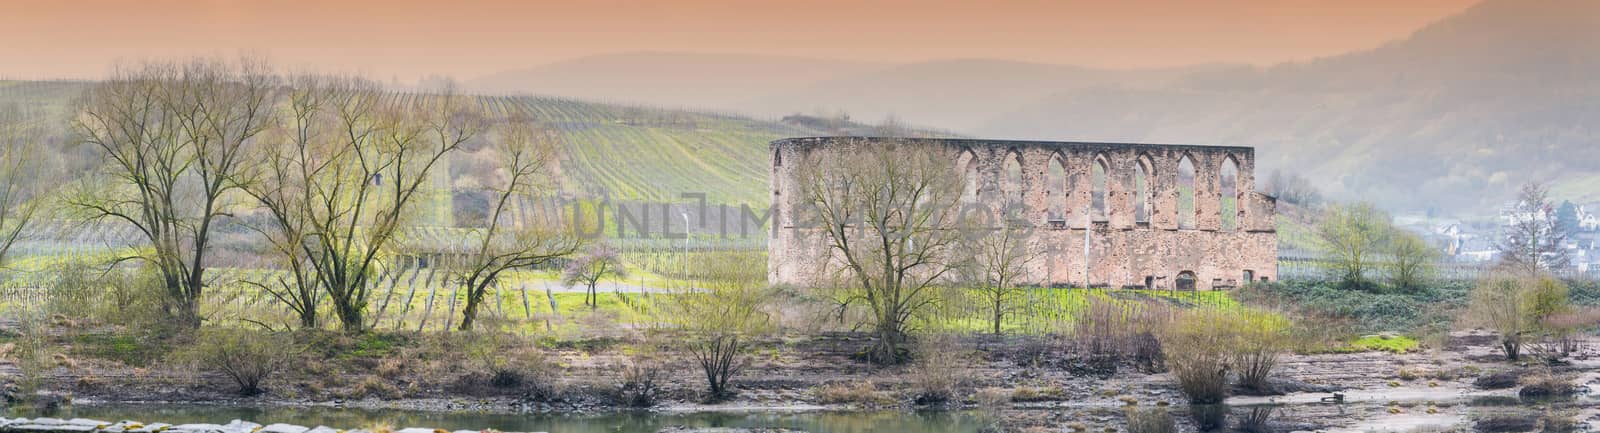 Artistic work of my own. HDR processing.
Panorama, ruins of a monastery in bars, on the Moselle, in the background the vineyard. Shot in the morning fog.